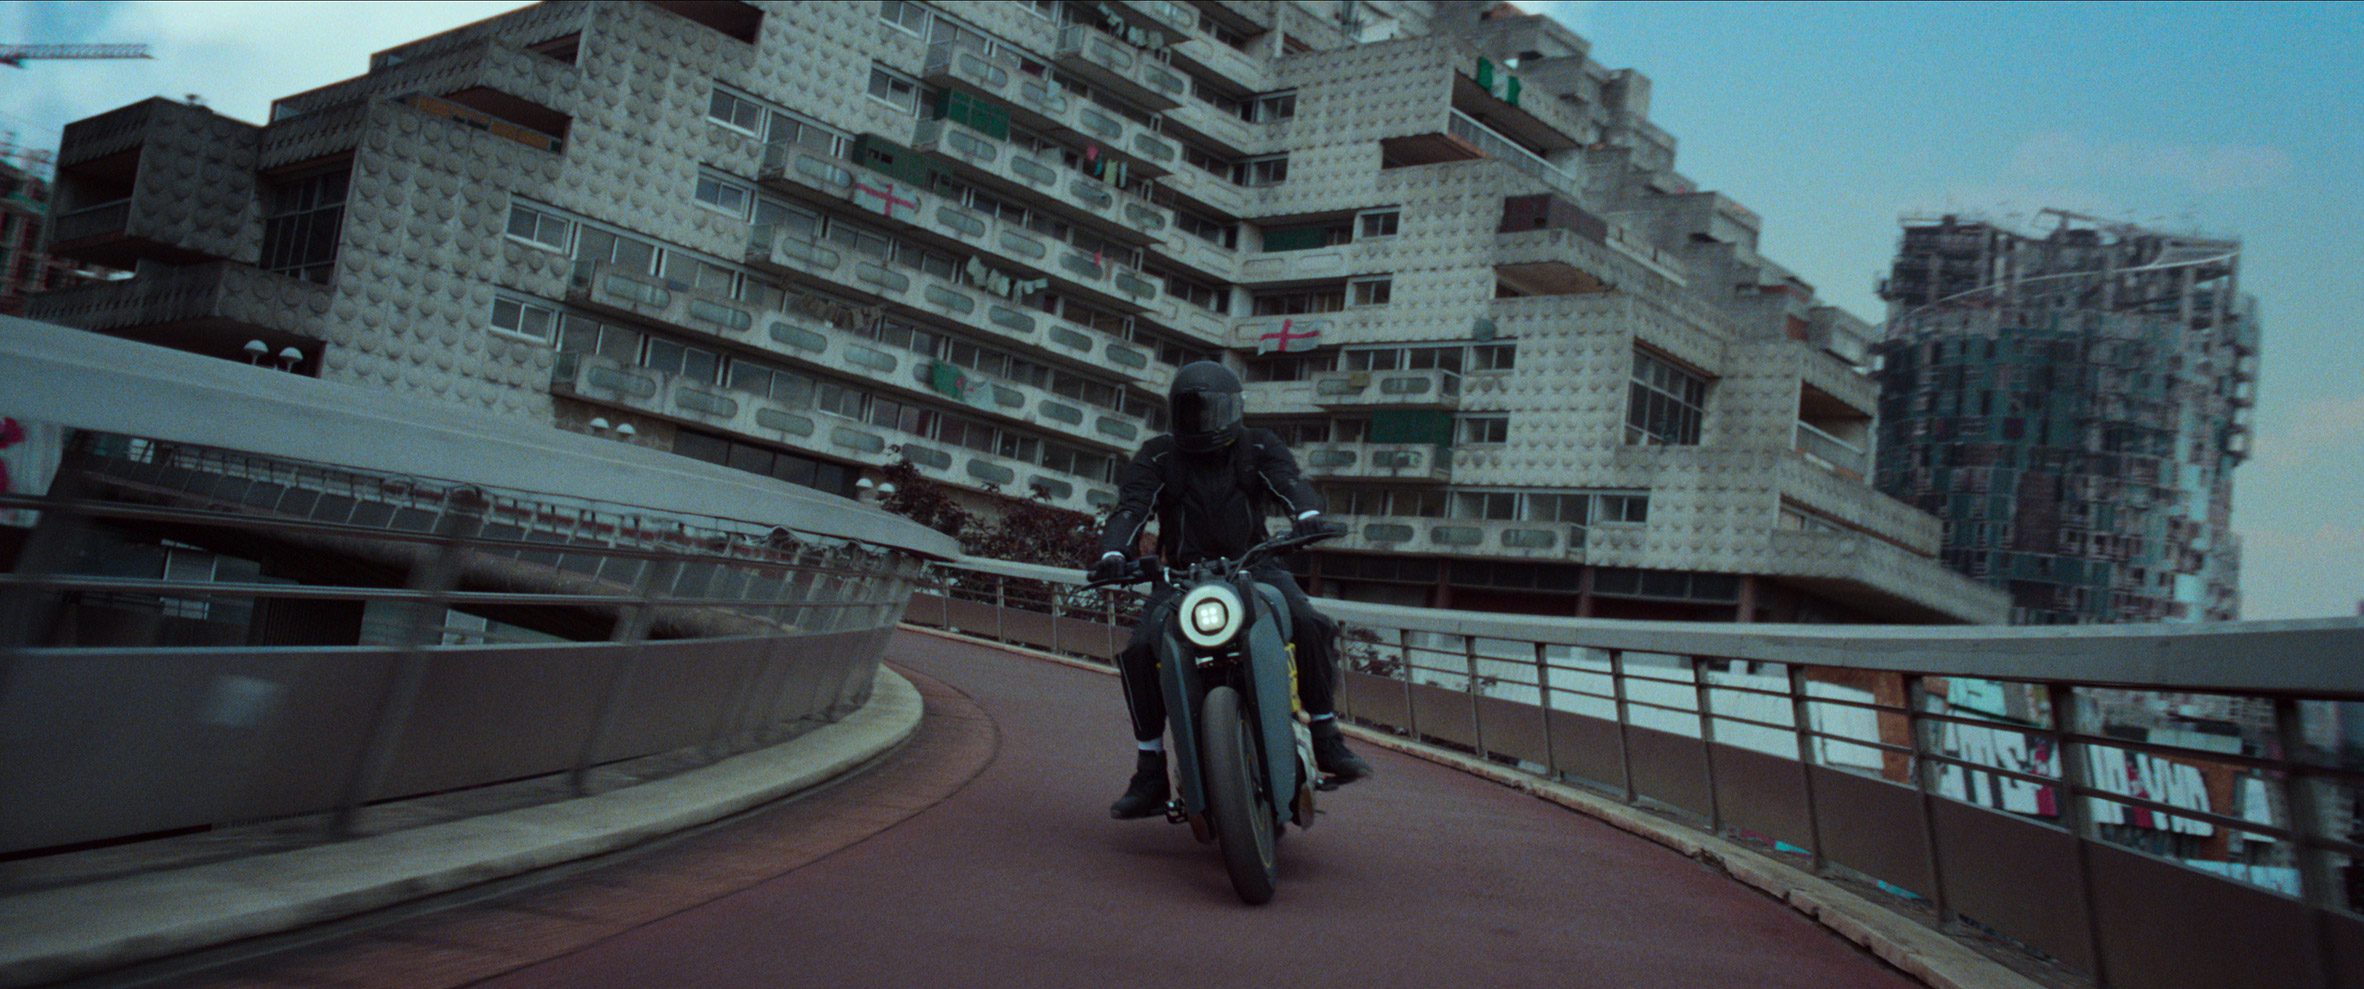 Motorbike in The Kitchen movie with filming location at Les Damiers